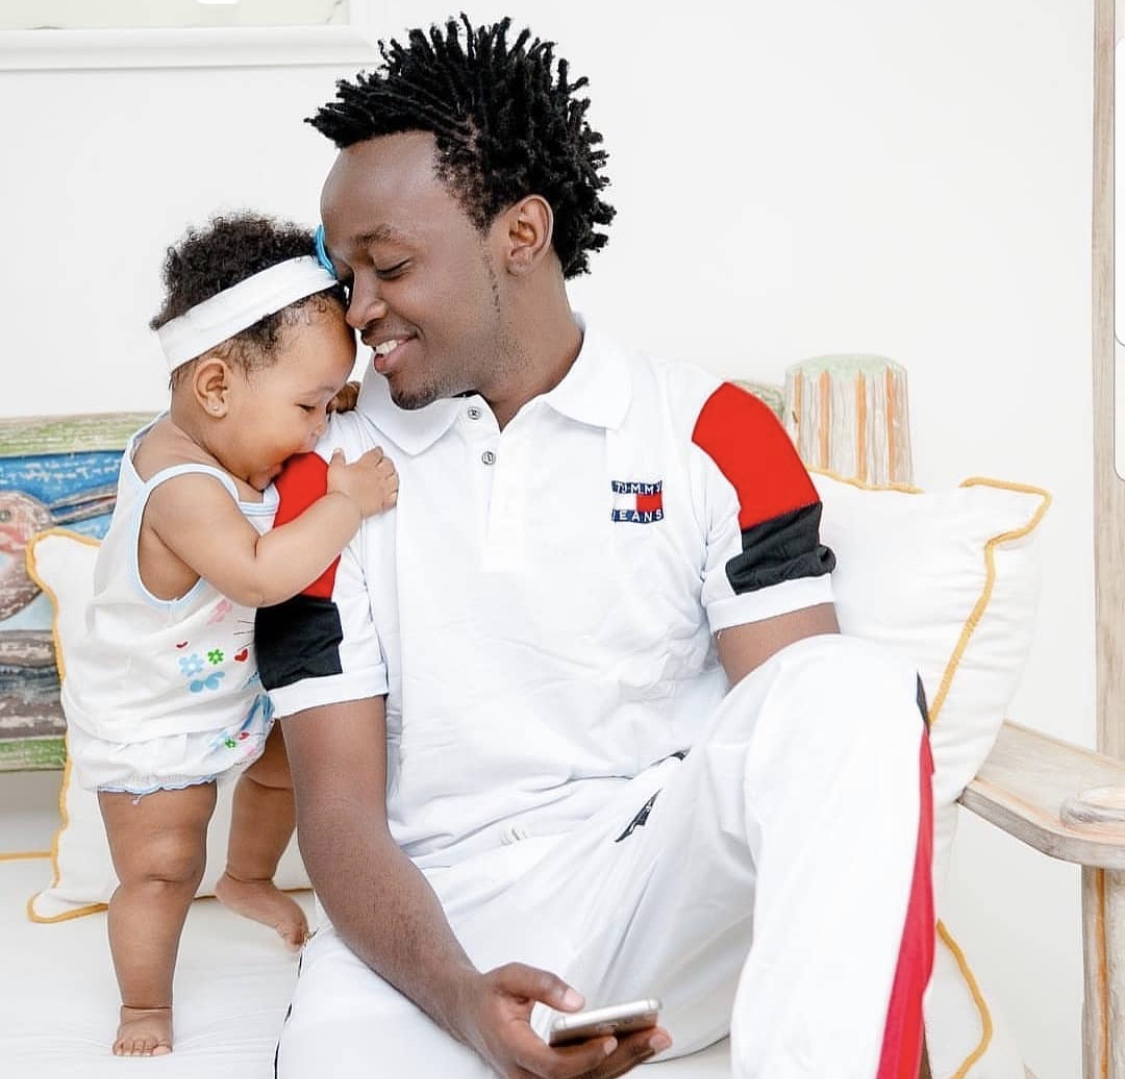 Boss baby! This is how baby Heaven refers to her daddy, Bahati